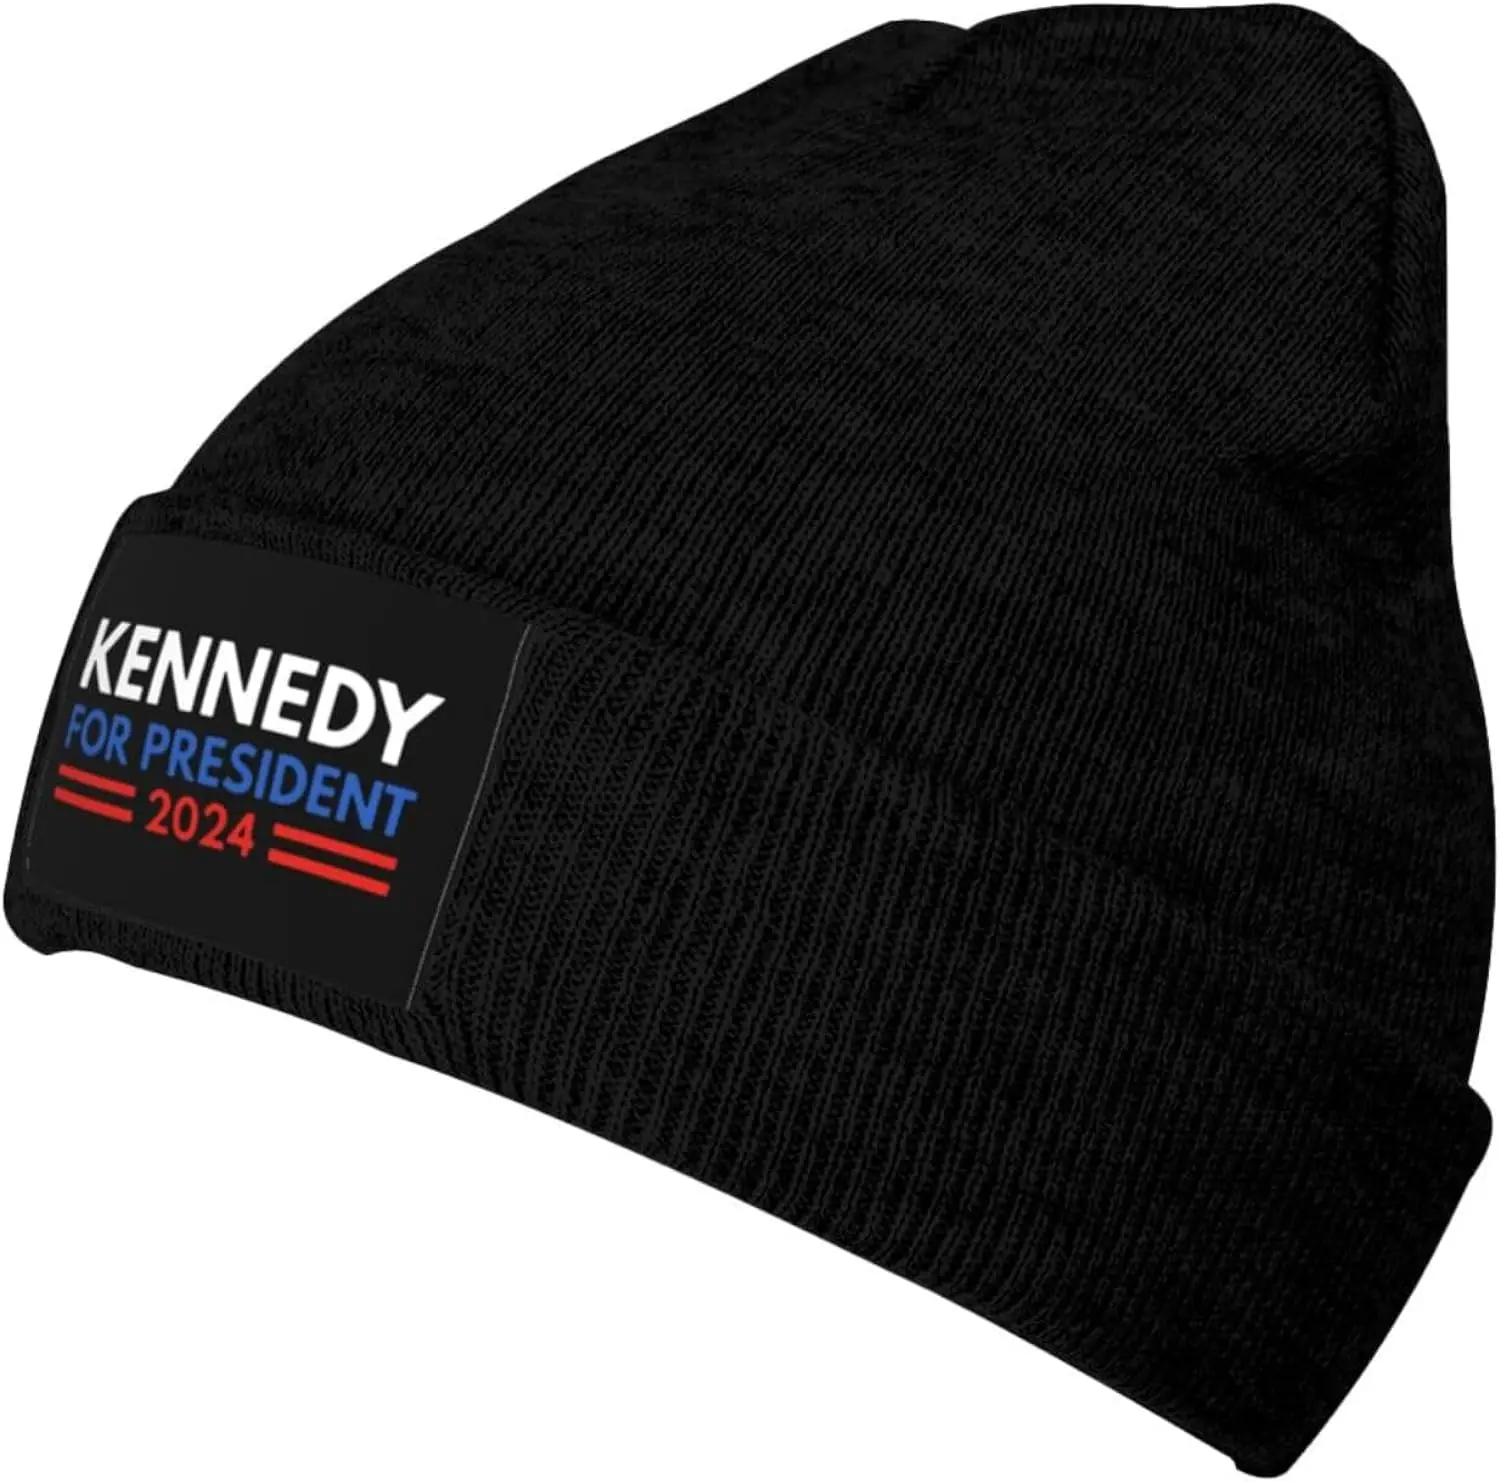 

Kennedy for President Beanie Hats Soft Stretch Knitted Hat Winter Warm Men Woman's Ski Caps